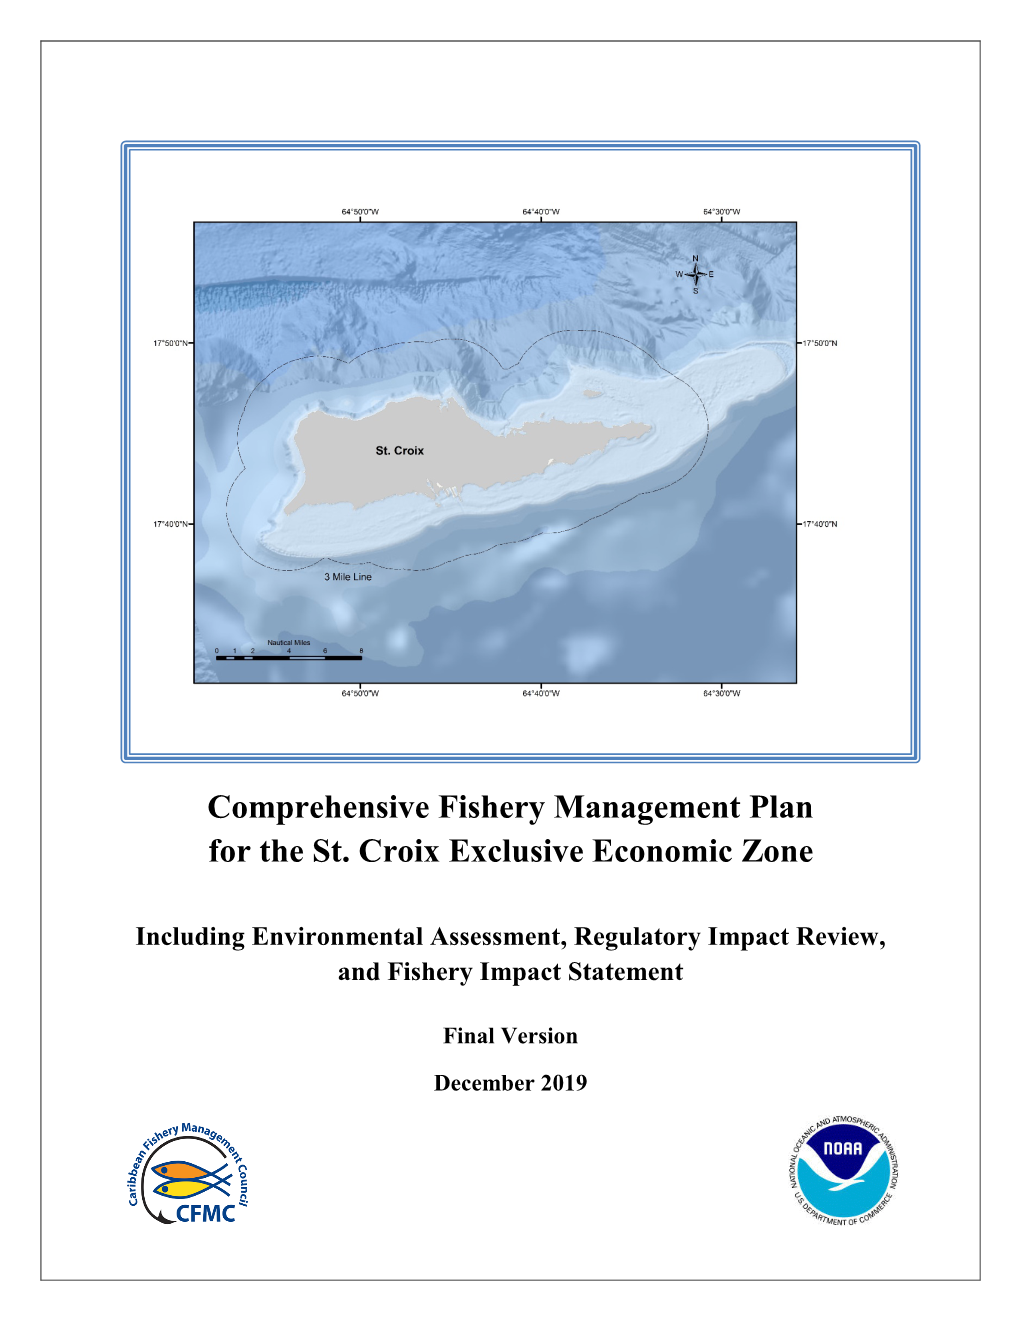 FMP for the St. Croix EEZ and Environmental Assessment